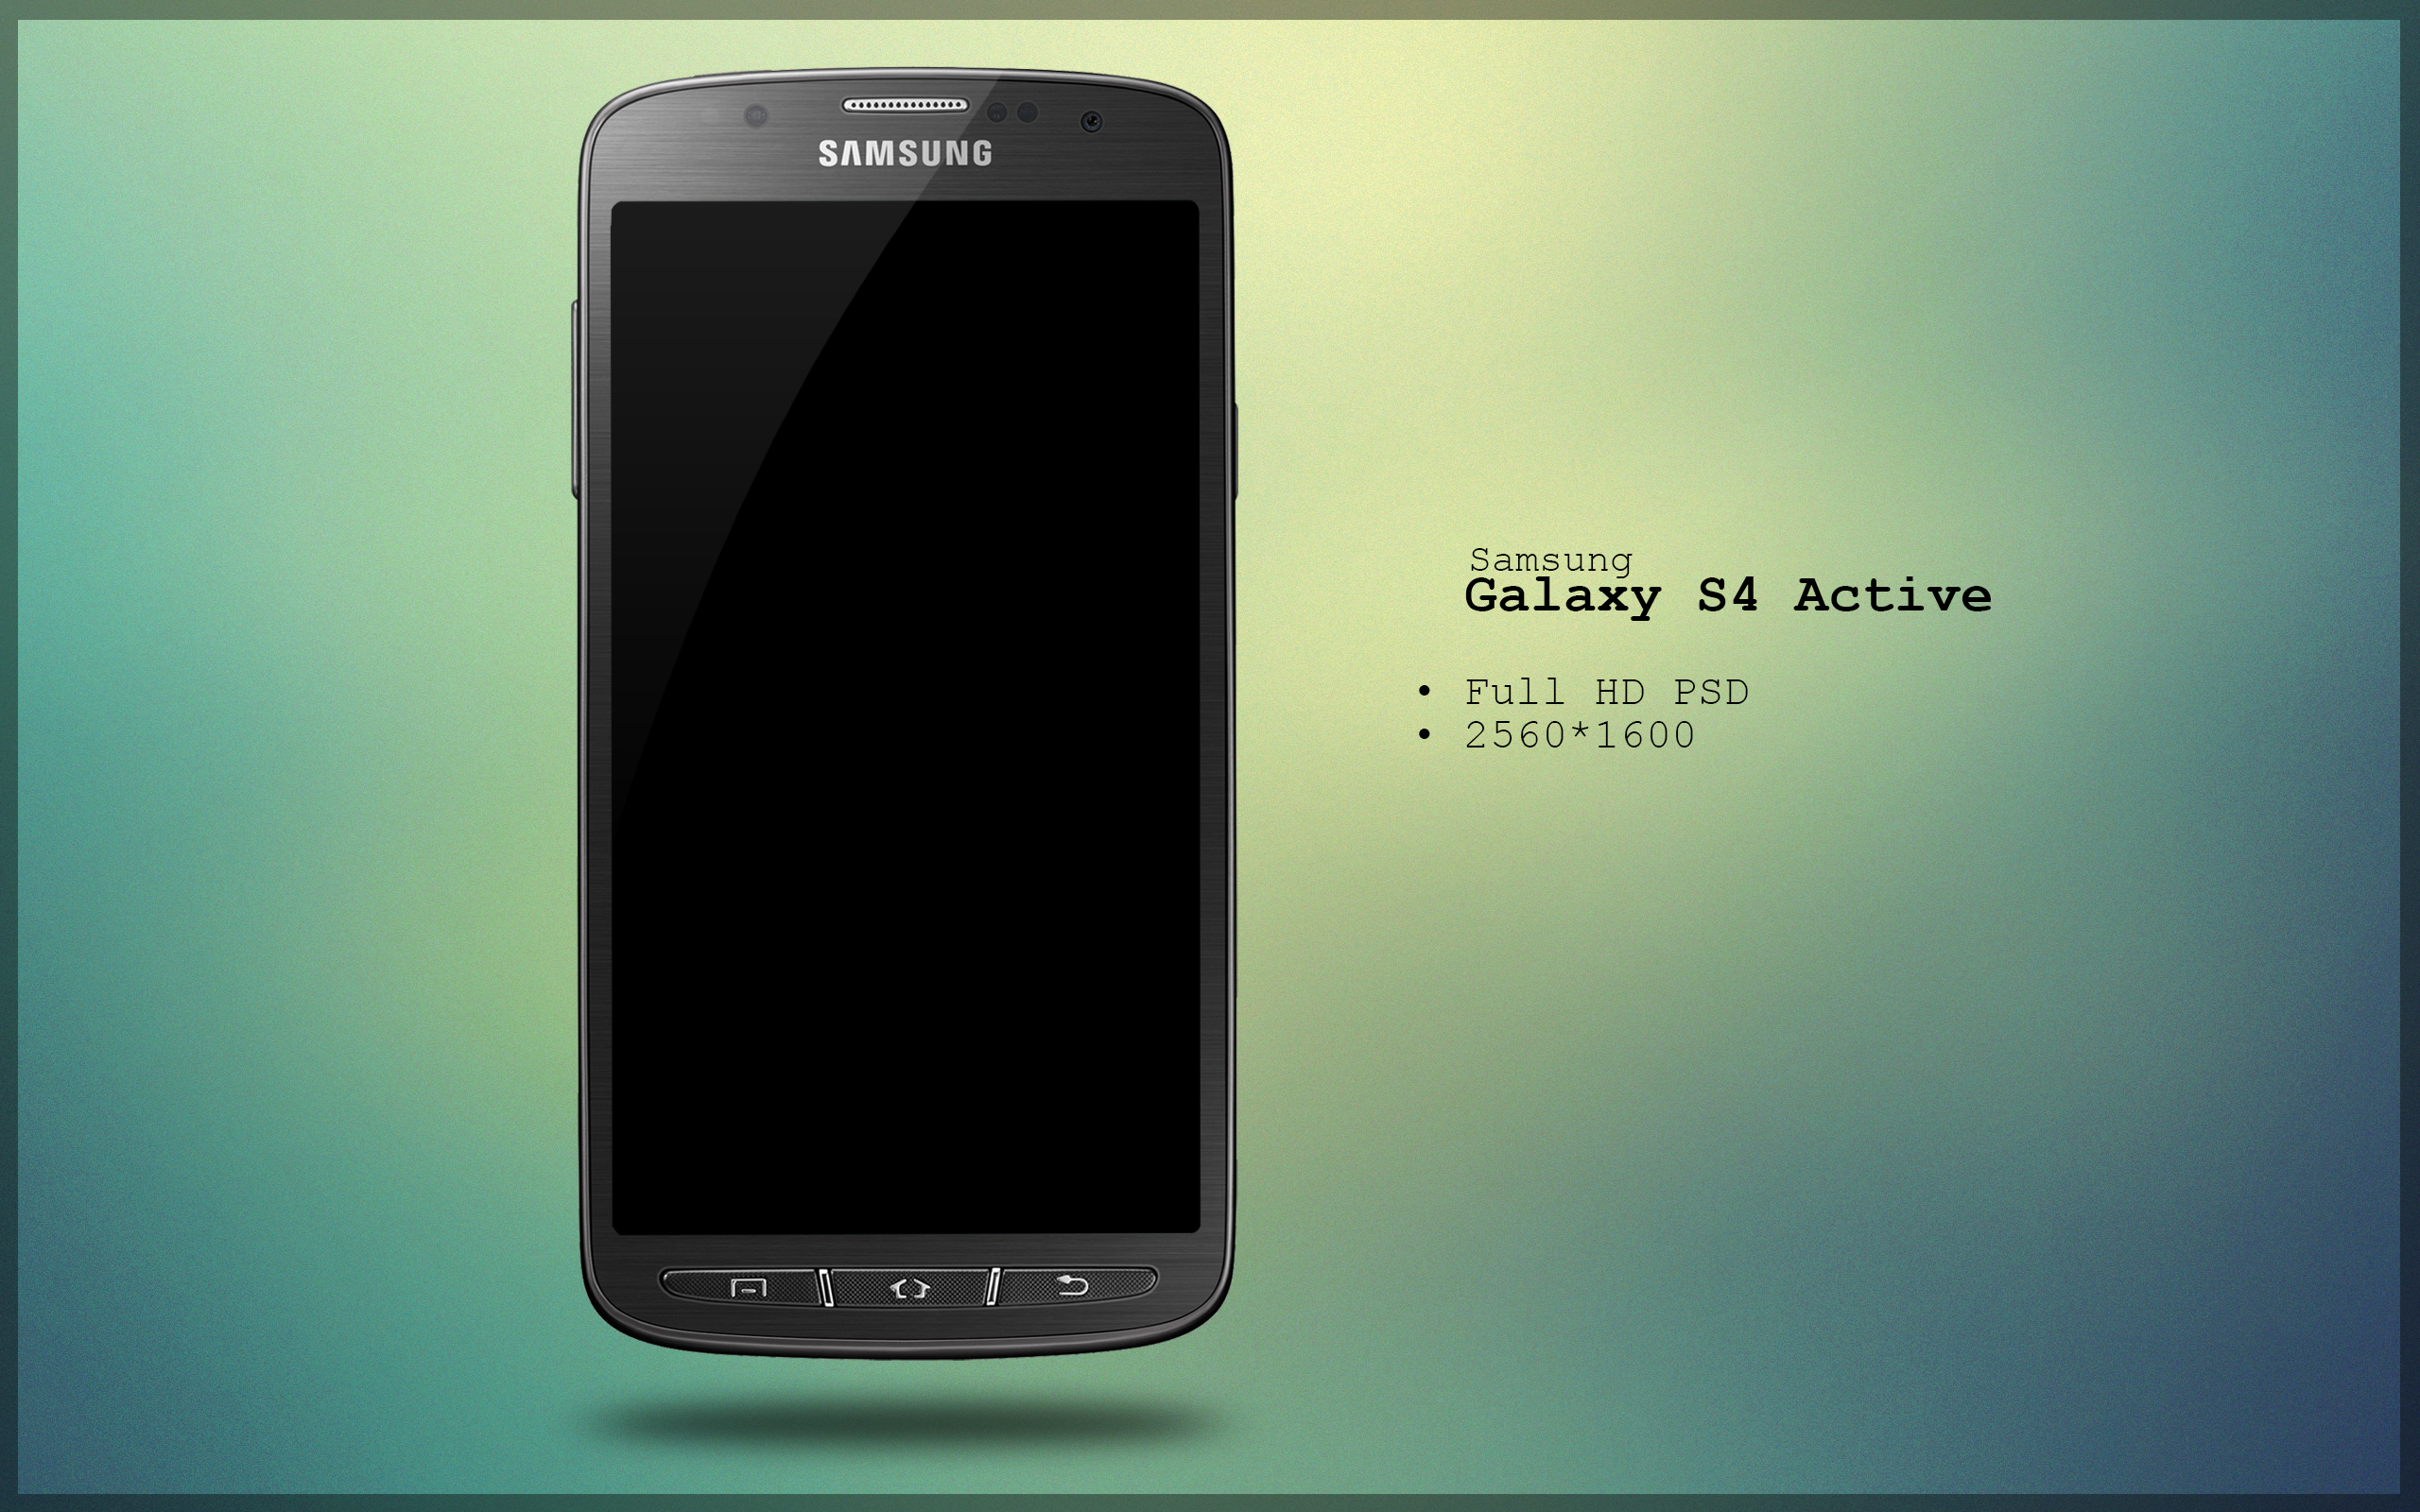 Apps for the Samsung Galaxy S4 Active